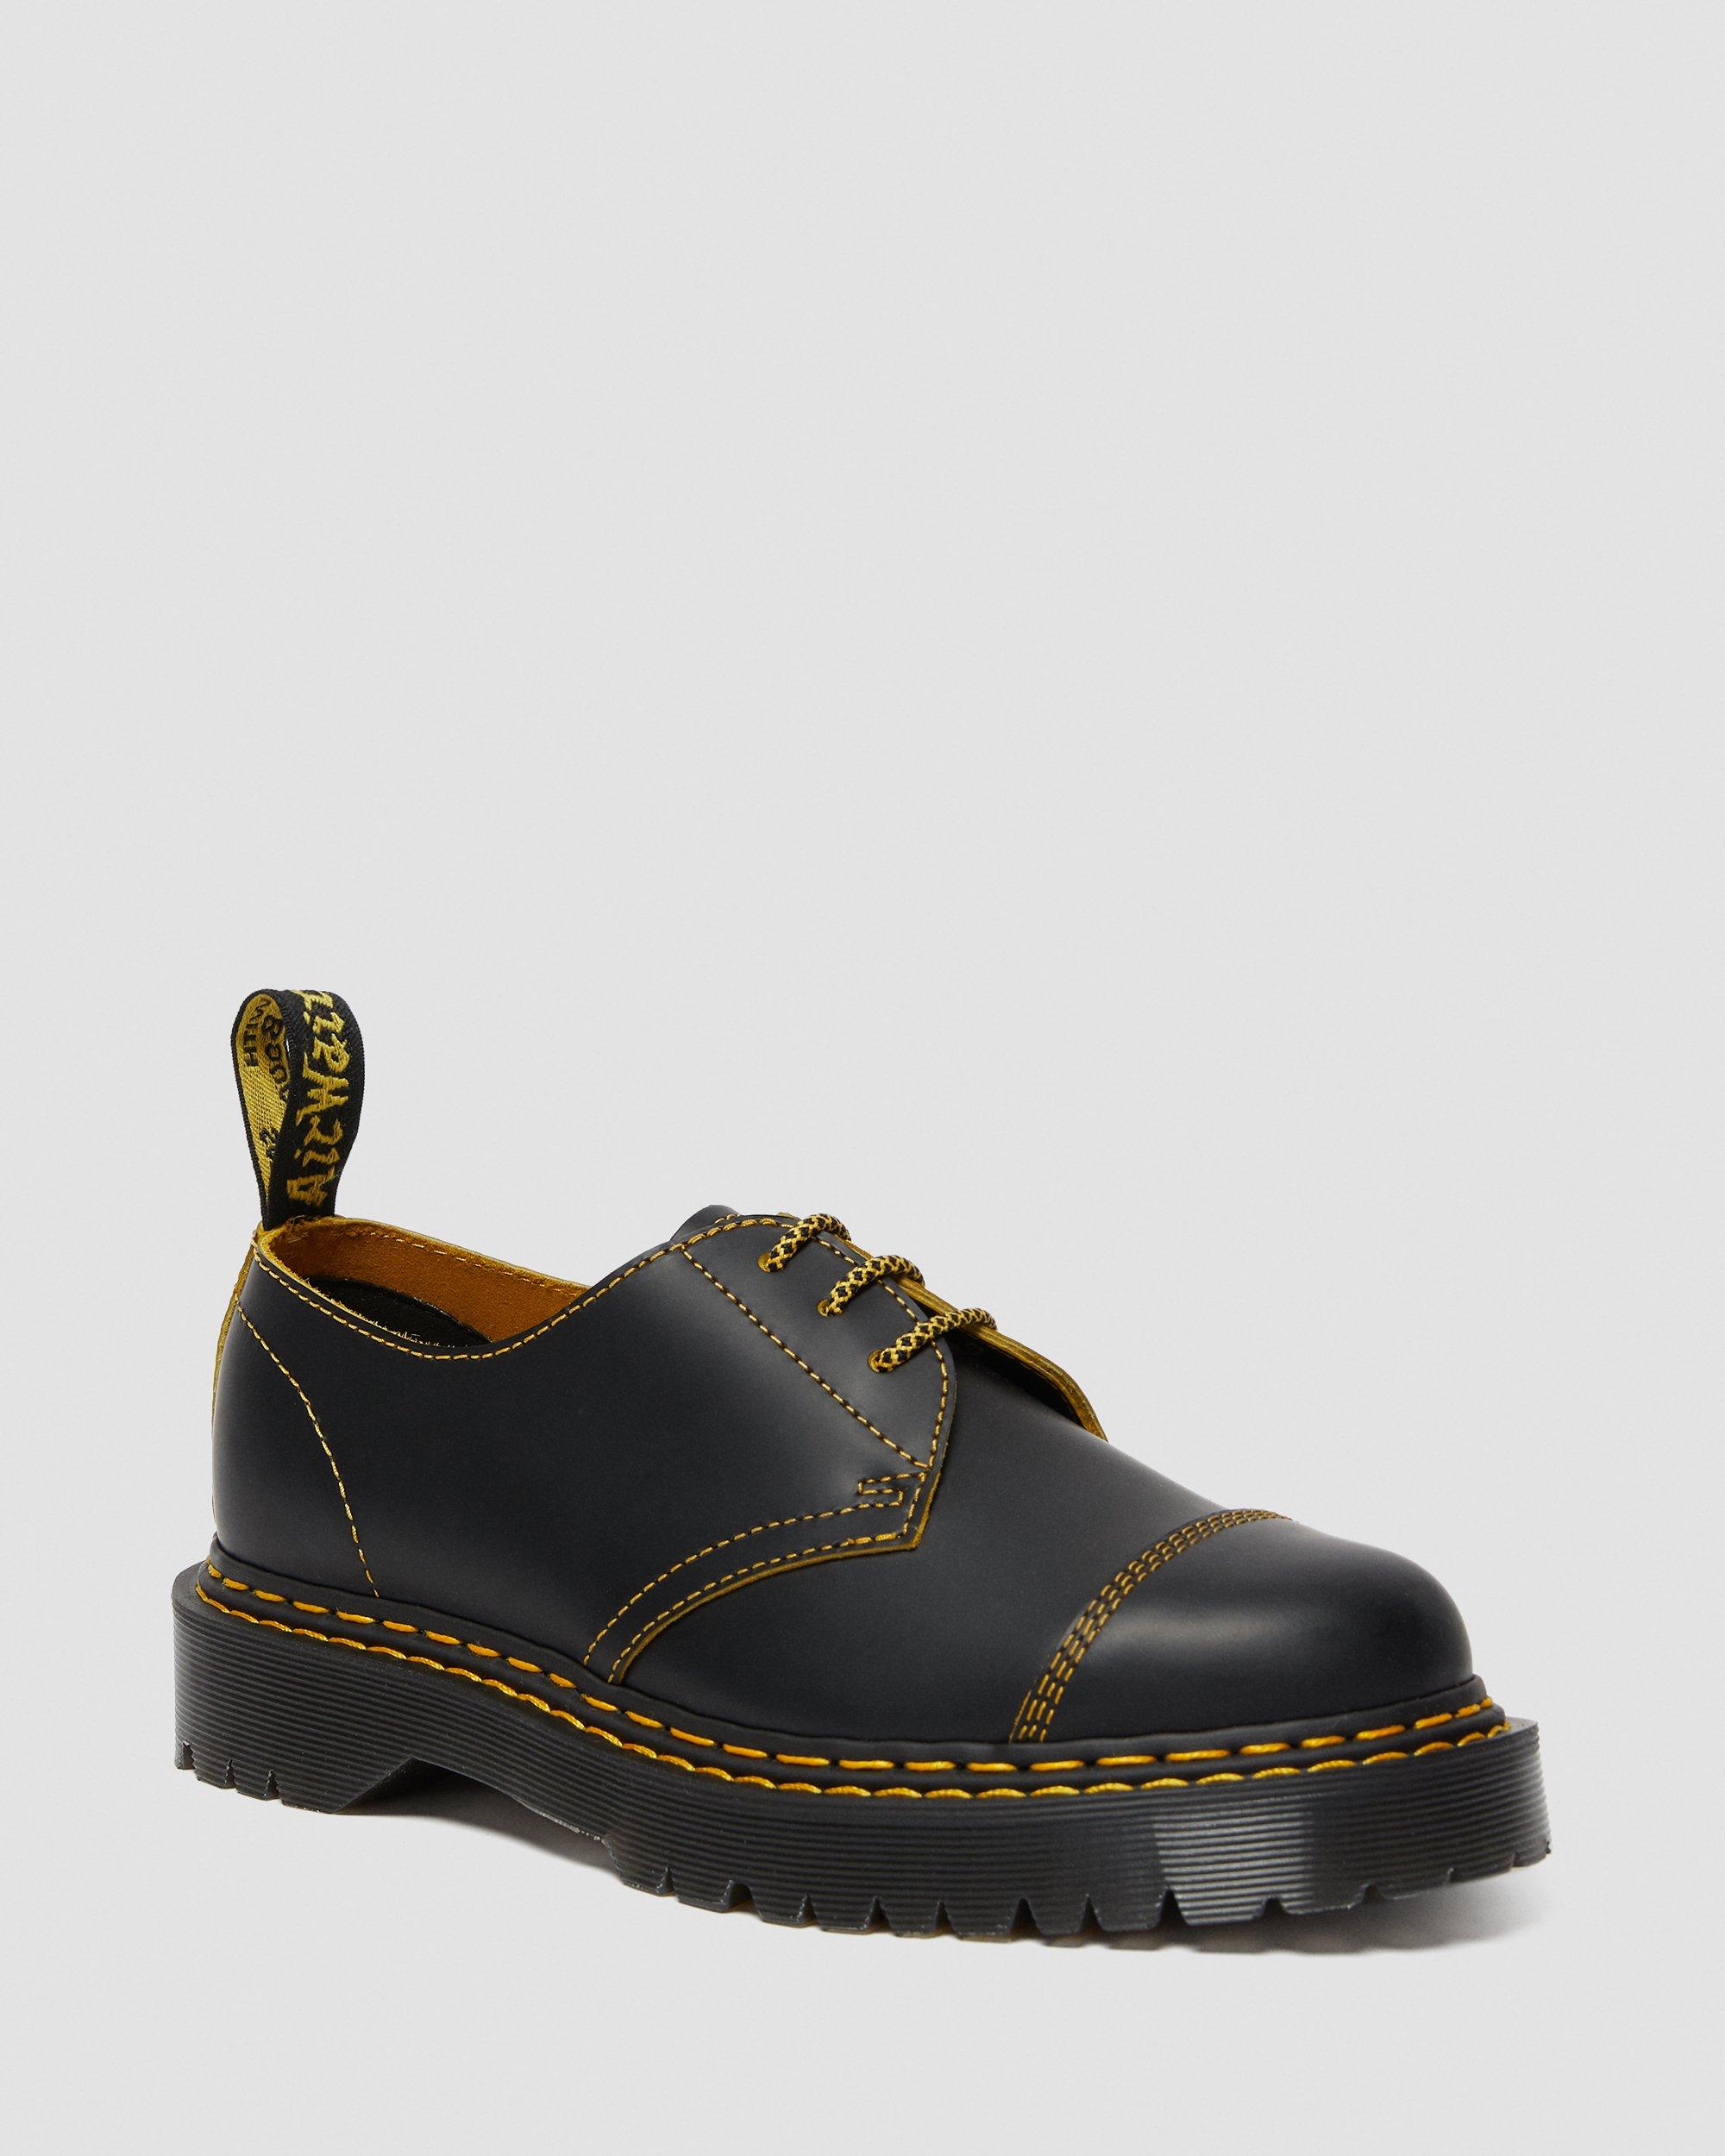 1461 BEX DOUBLE STITCH LEATHER SHOES in Black | Dr. Martens